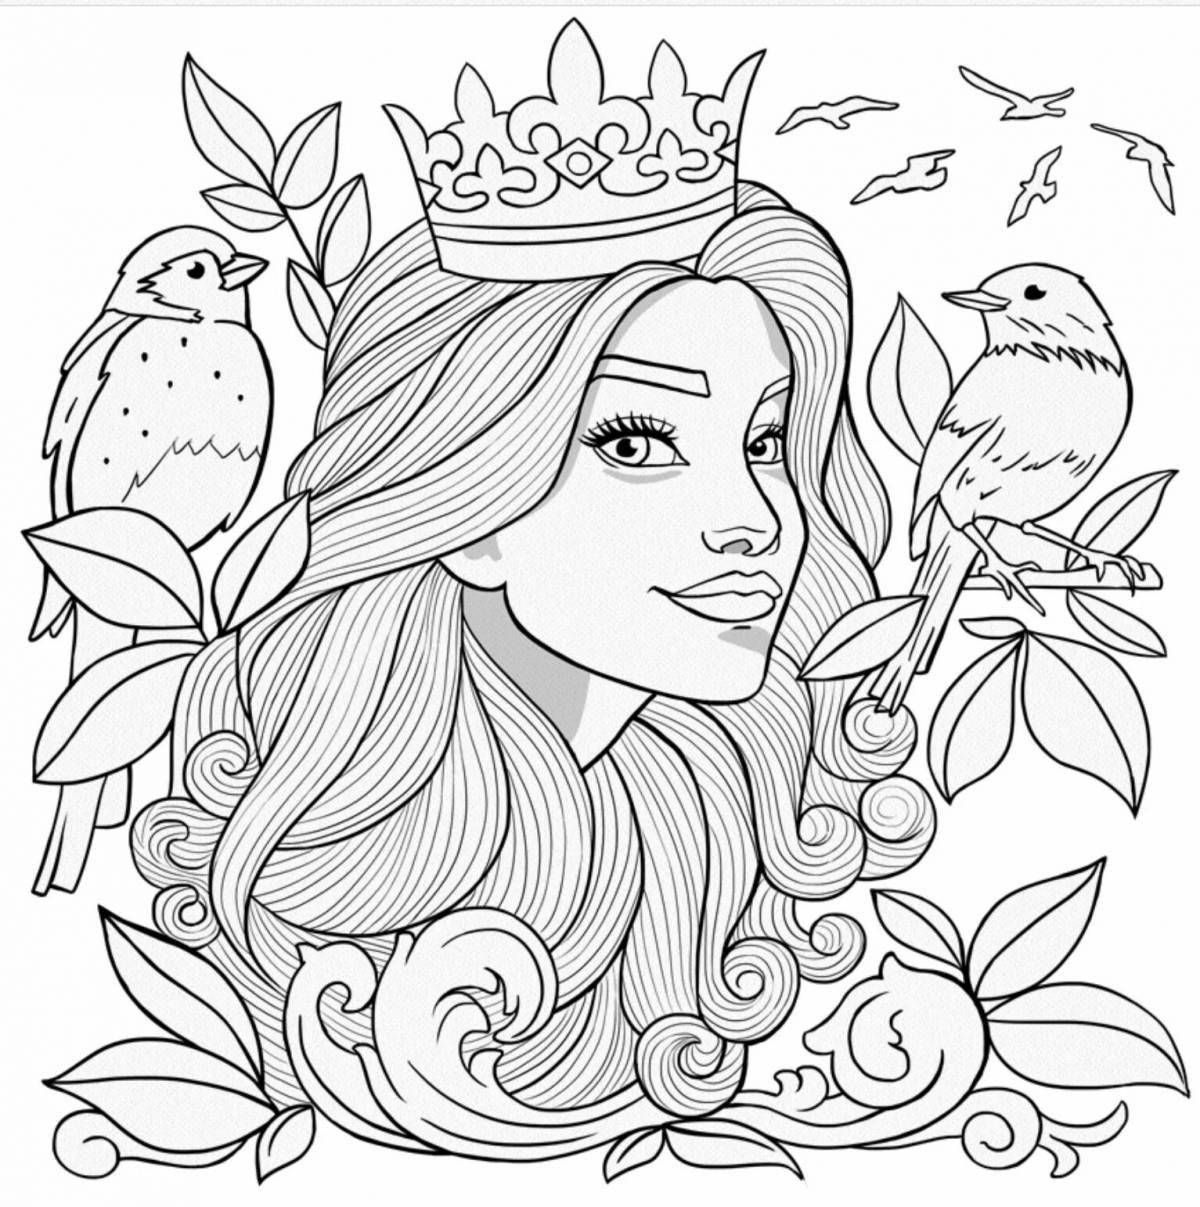 Magic coloring book for 14 year old girls